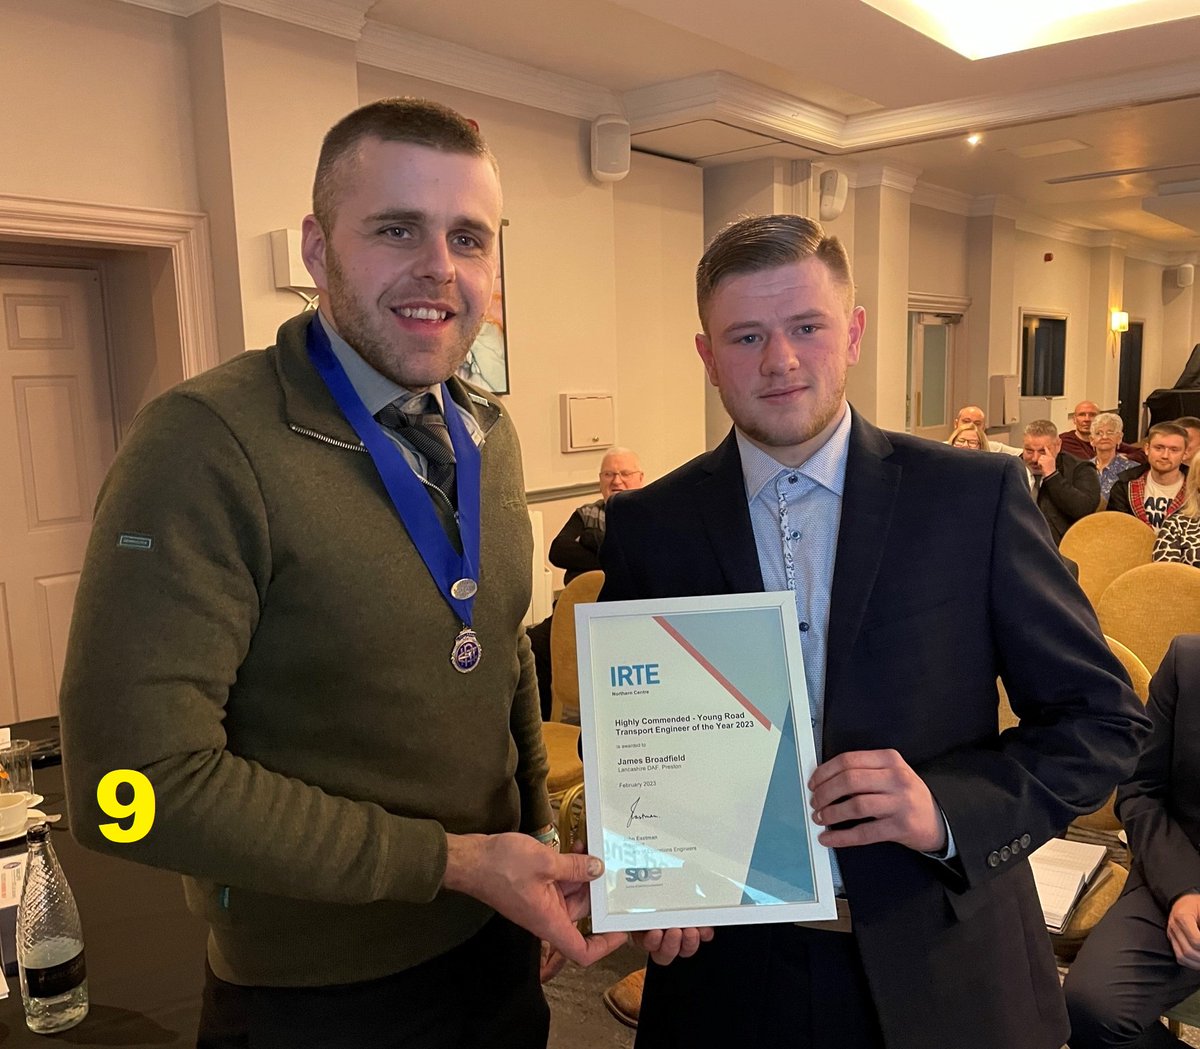 Starting with our first highly commended finalist of the IRTE Northern Centre Young Engineer of the Year Award 2023 - James Broadfield of Lancashire DAF in Preston!

Well done James!

@LancashireDaf @DAFTrucksUK